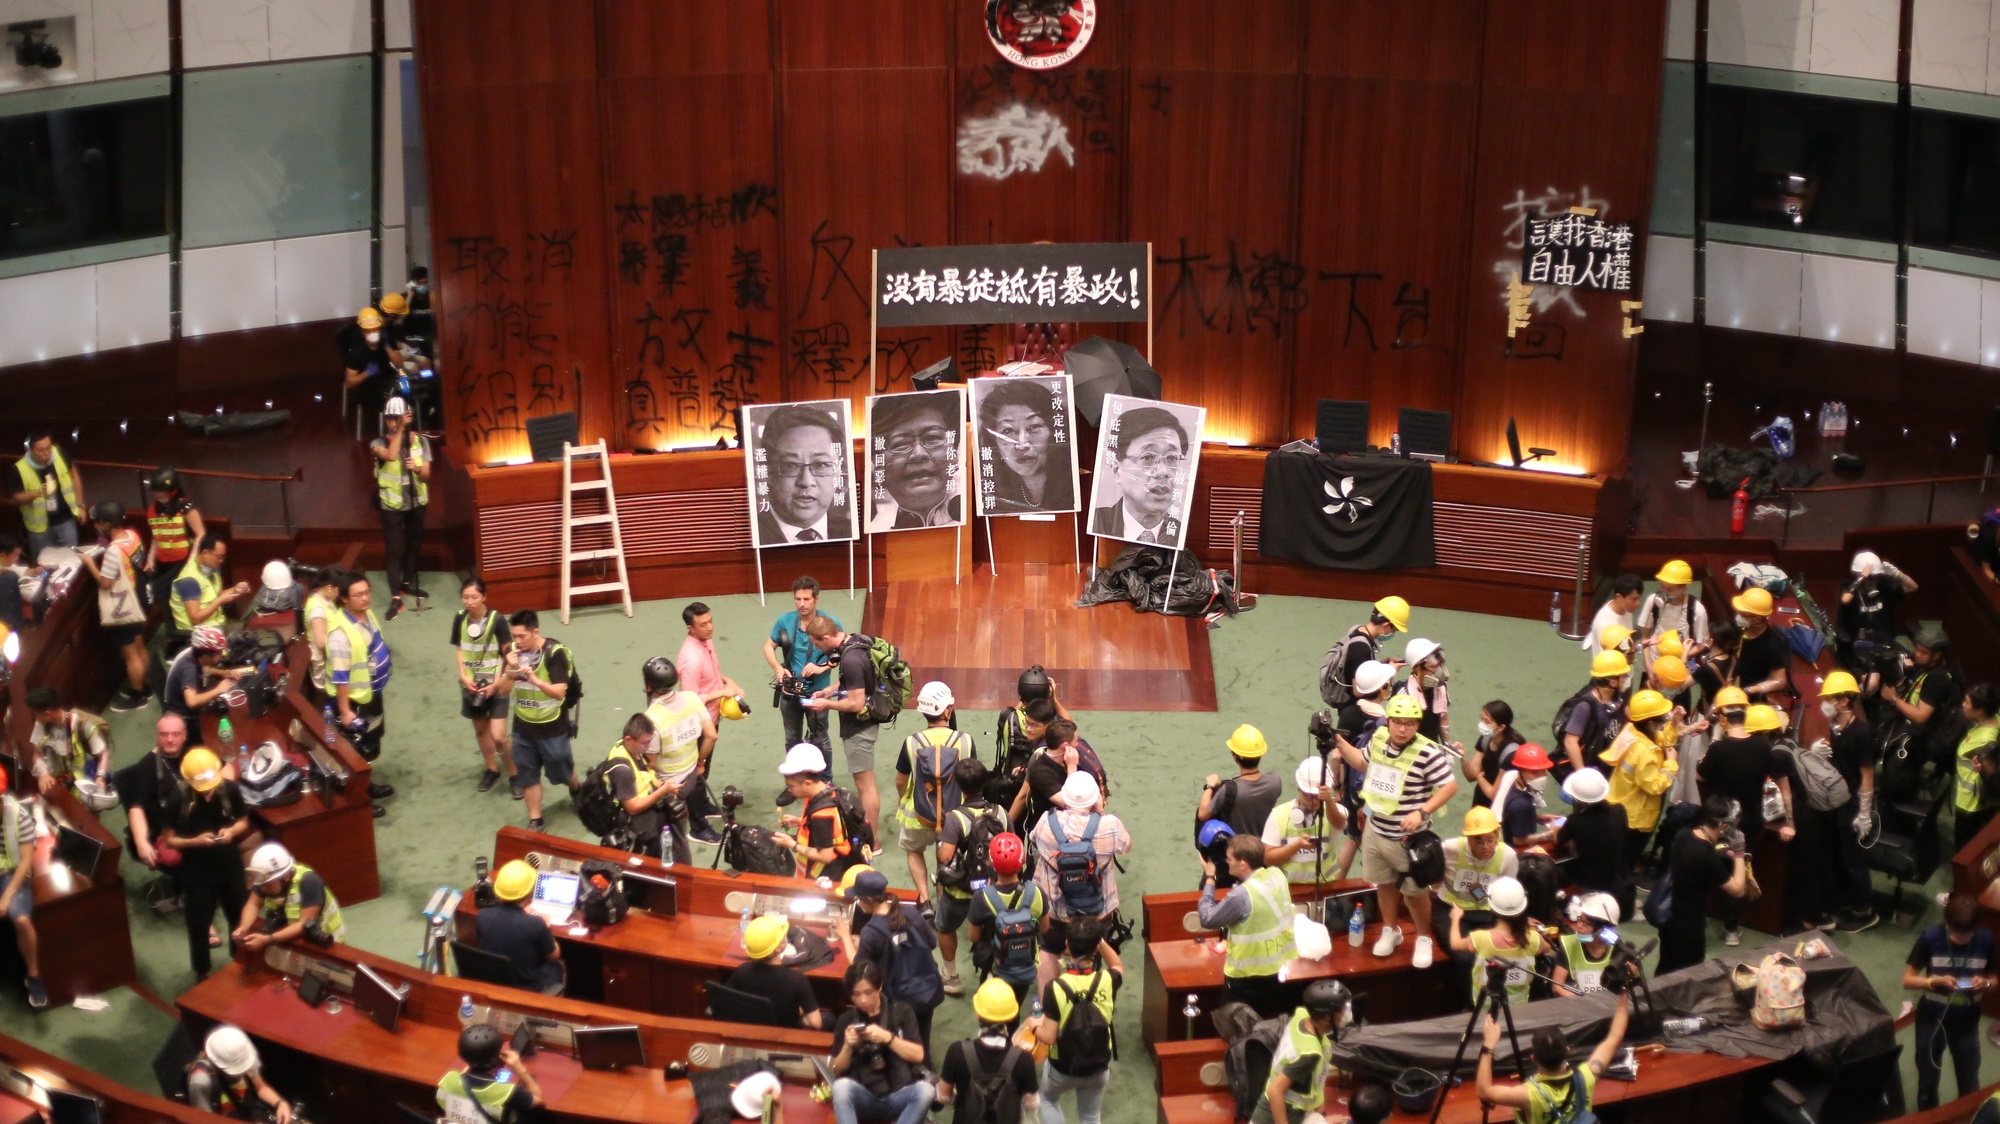 epa07687502 A general view of the main chamber after protesters break into the Legislative Council building during the annual 01 July pro-democracy march in Hong Kong, China, 01 July 2019. Protesters are demanding the resignation of Hong Kong Chief Executive Carrie Lam and the full withdrawal of a suspended extradition bill. On 01 July, Hong Kong marks the 1997 transfer of sovereignty of Hong Kong from Britain to China.  EPA/RITCHIE B. TONGO